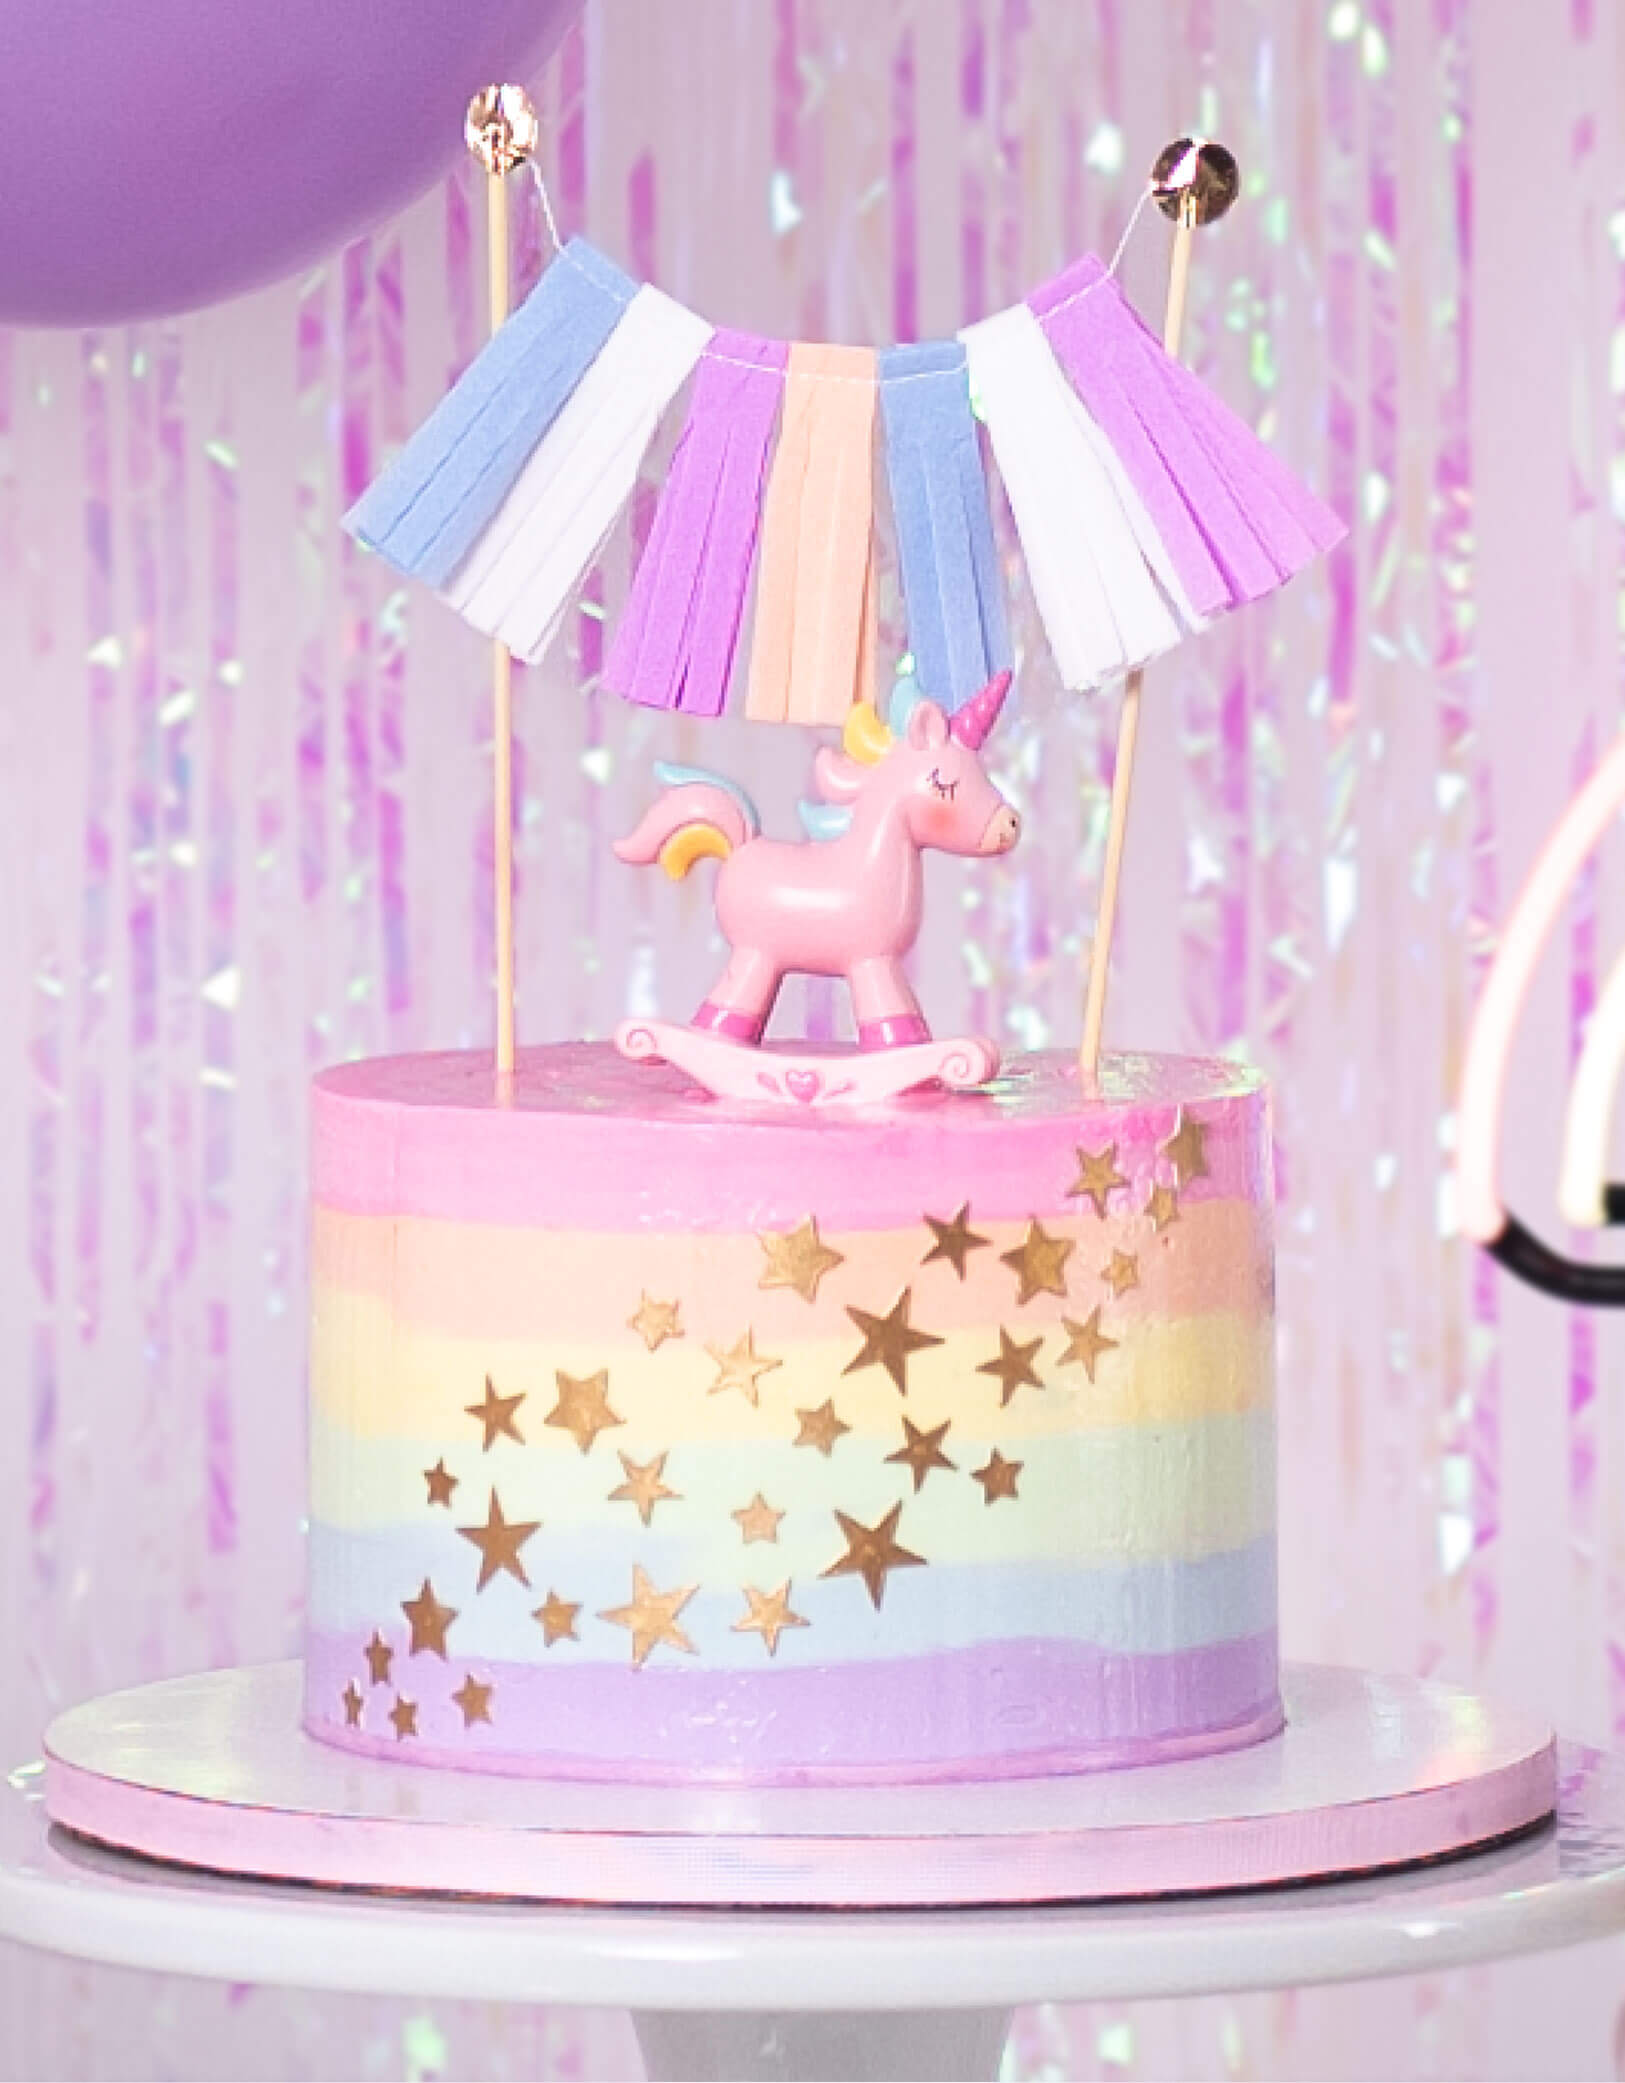 Pastel Rainbow cake with Unicorn and Pastel Tassel cake toppers 